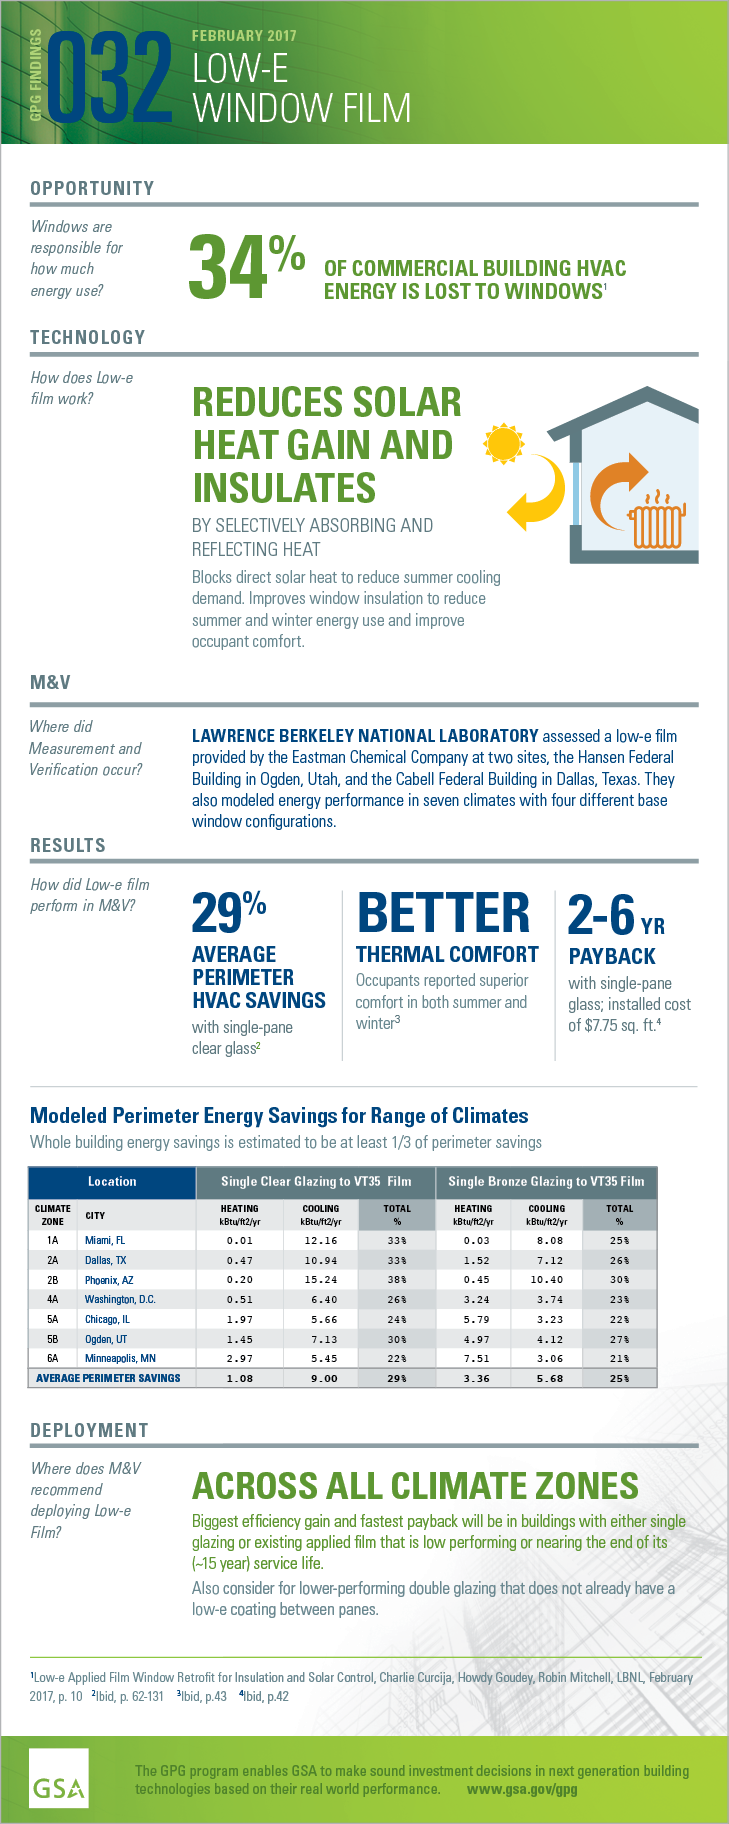 Download the PDF of the full-size infographic for GPG032 Low-E Window Film.